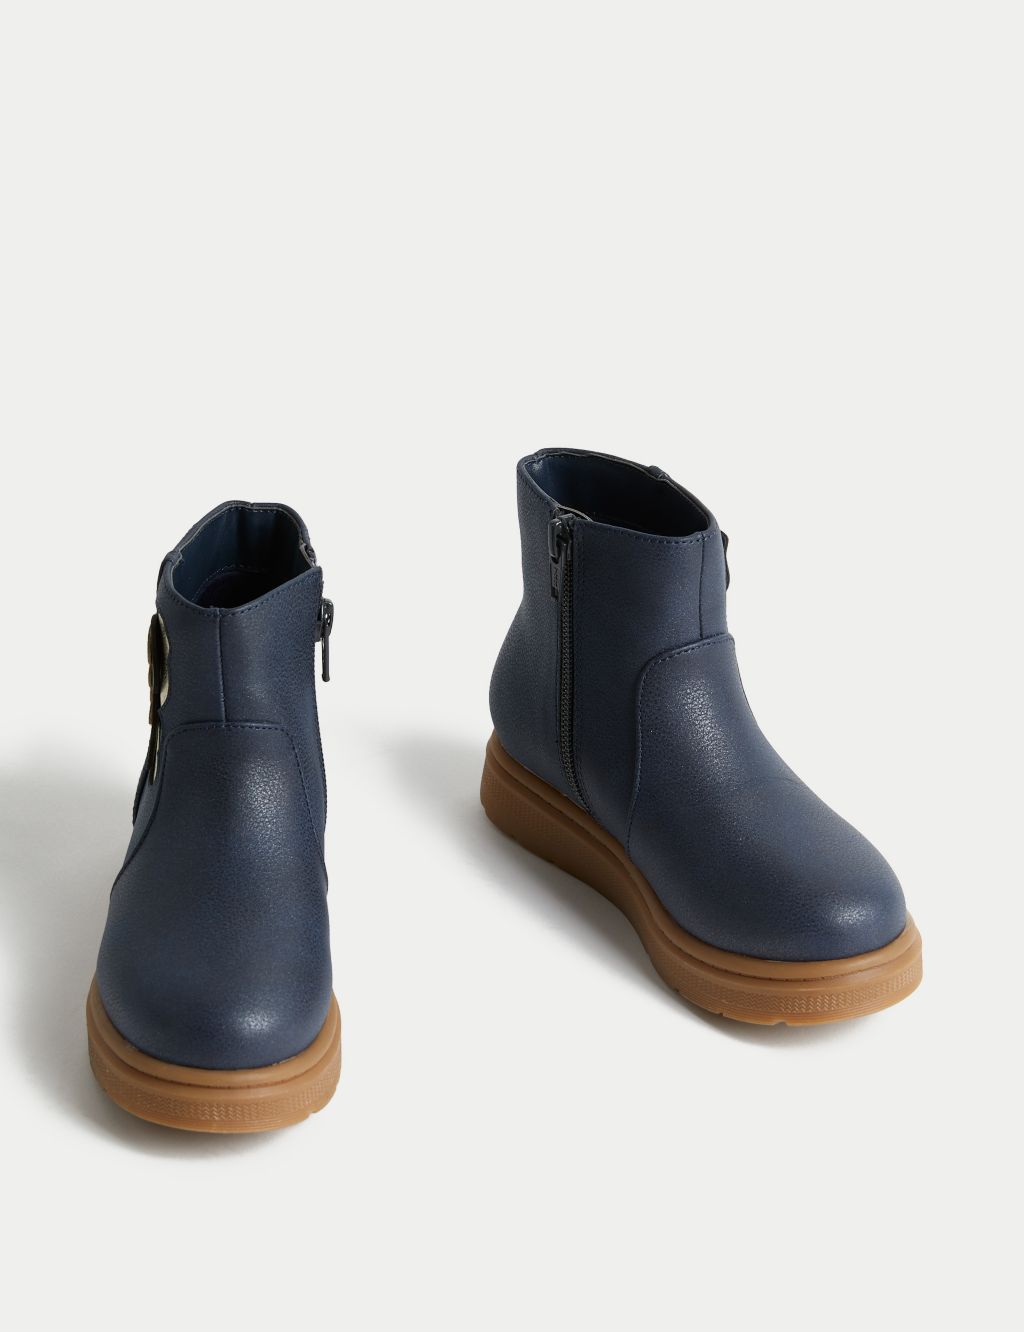 Kids' Freshfeet™ Chelsea Boots (4 Small - 2 Large) image 2